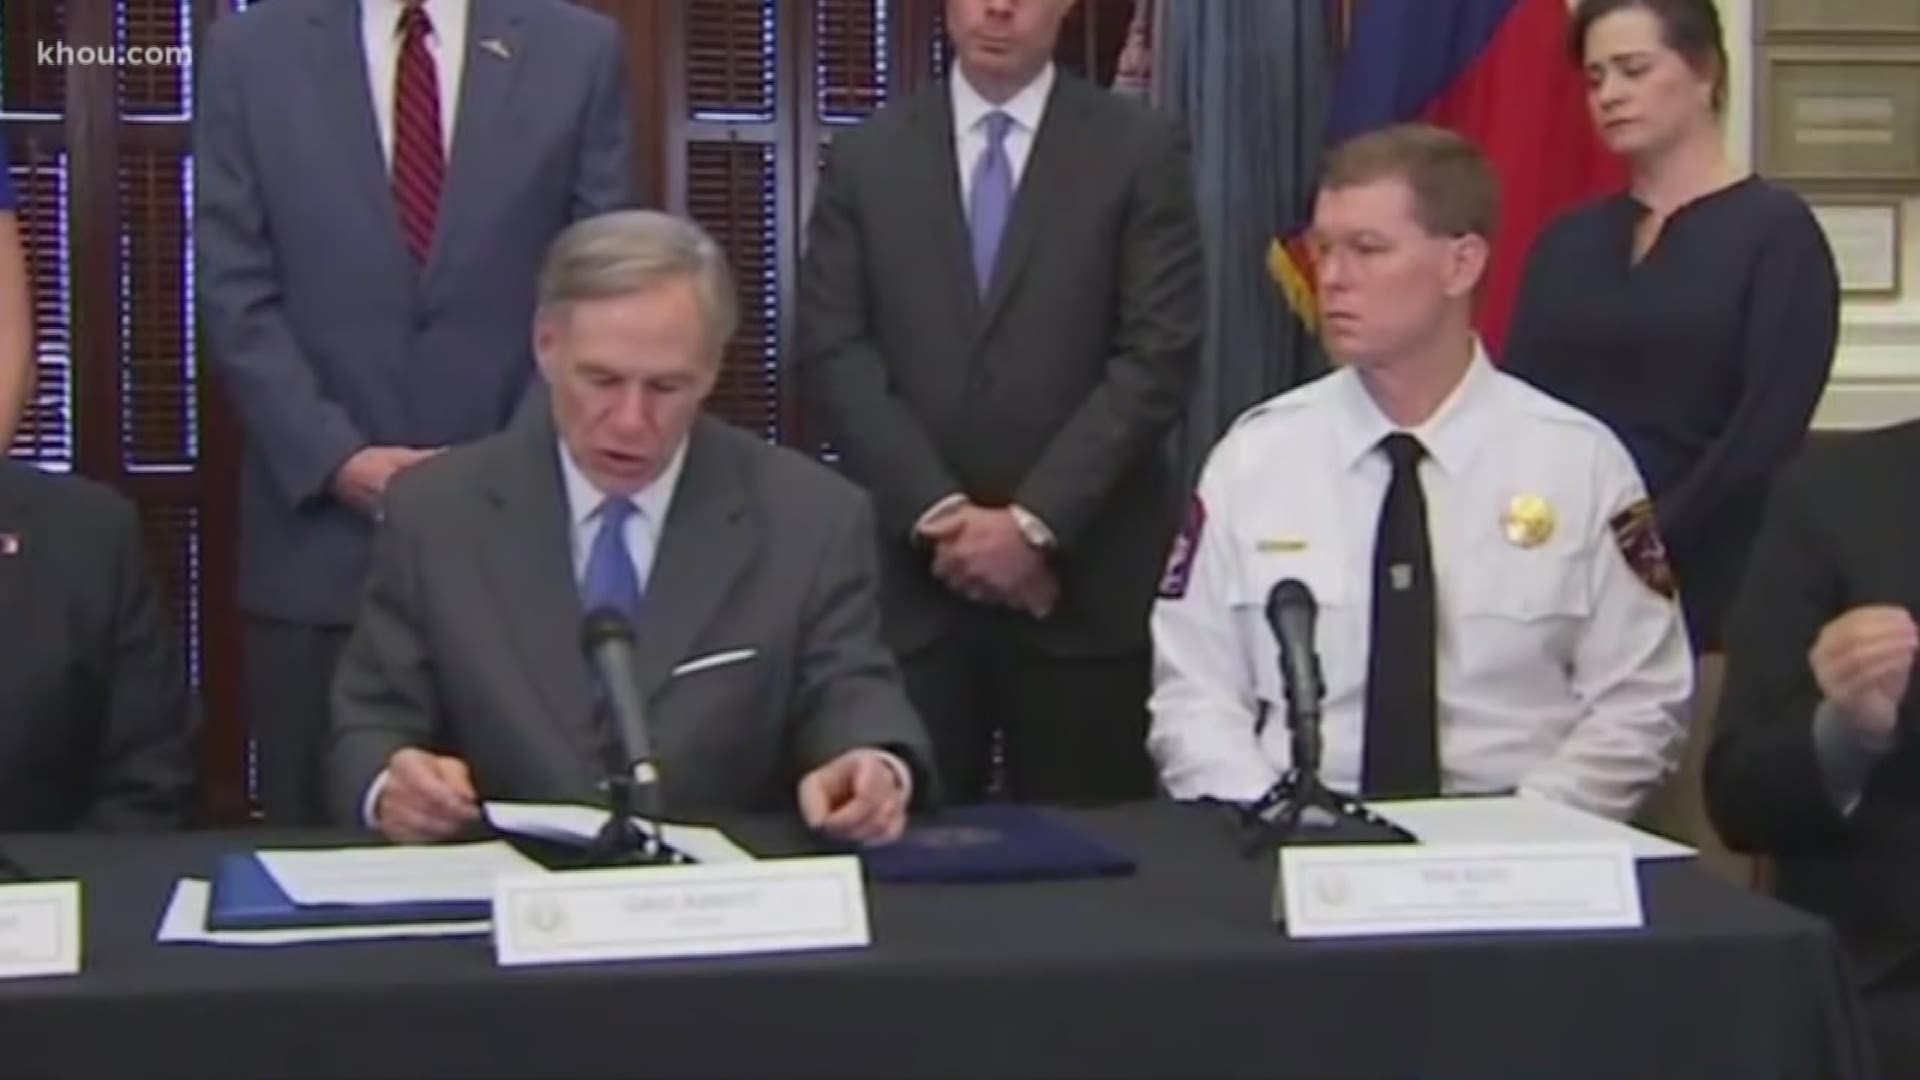 Texas Gov. Greg Abbott is asking the residents to practice social distancing and do whatever else they can to help prevent the spread of COVID-19.